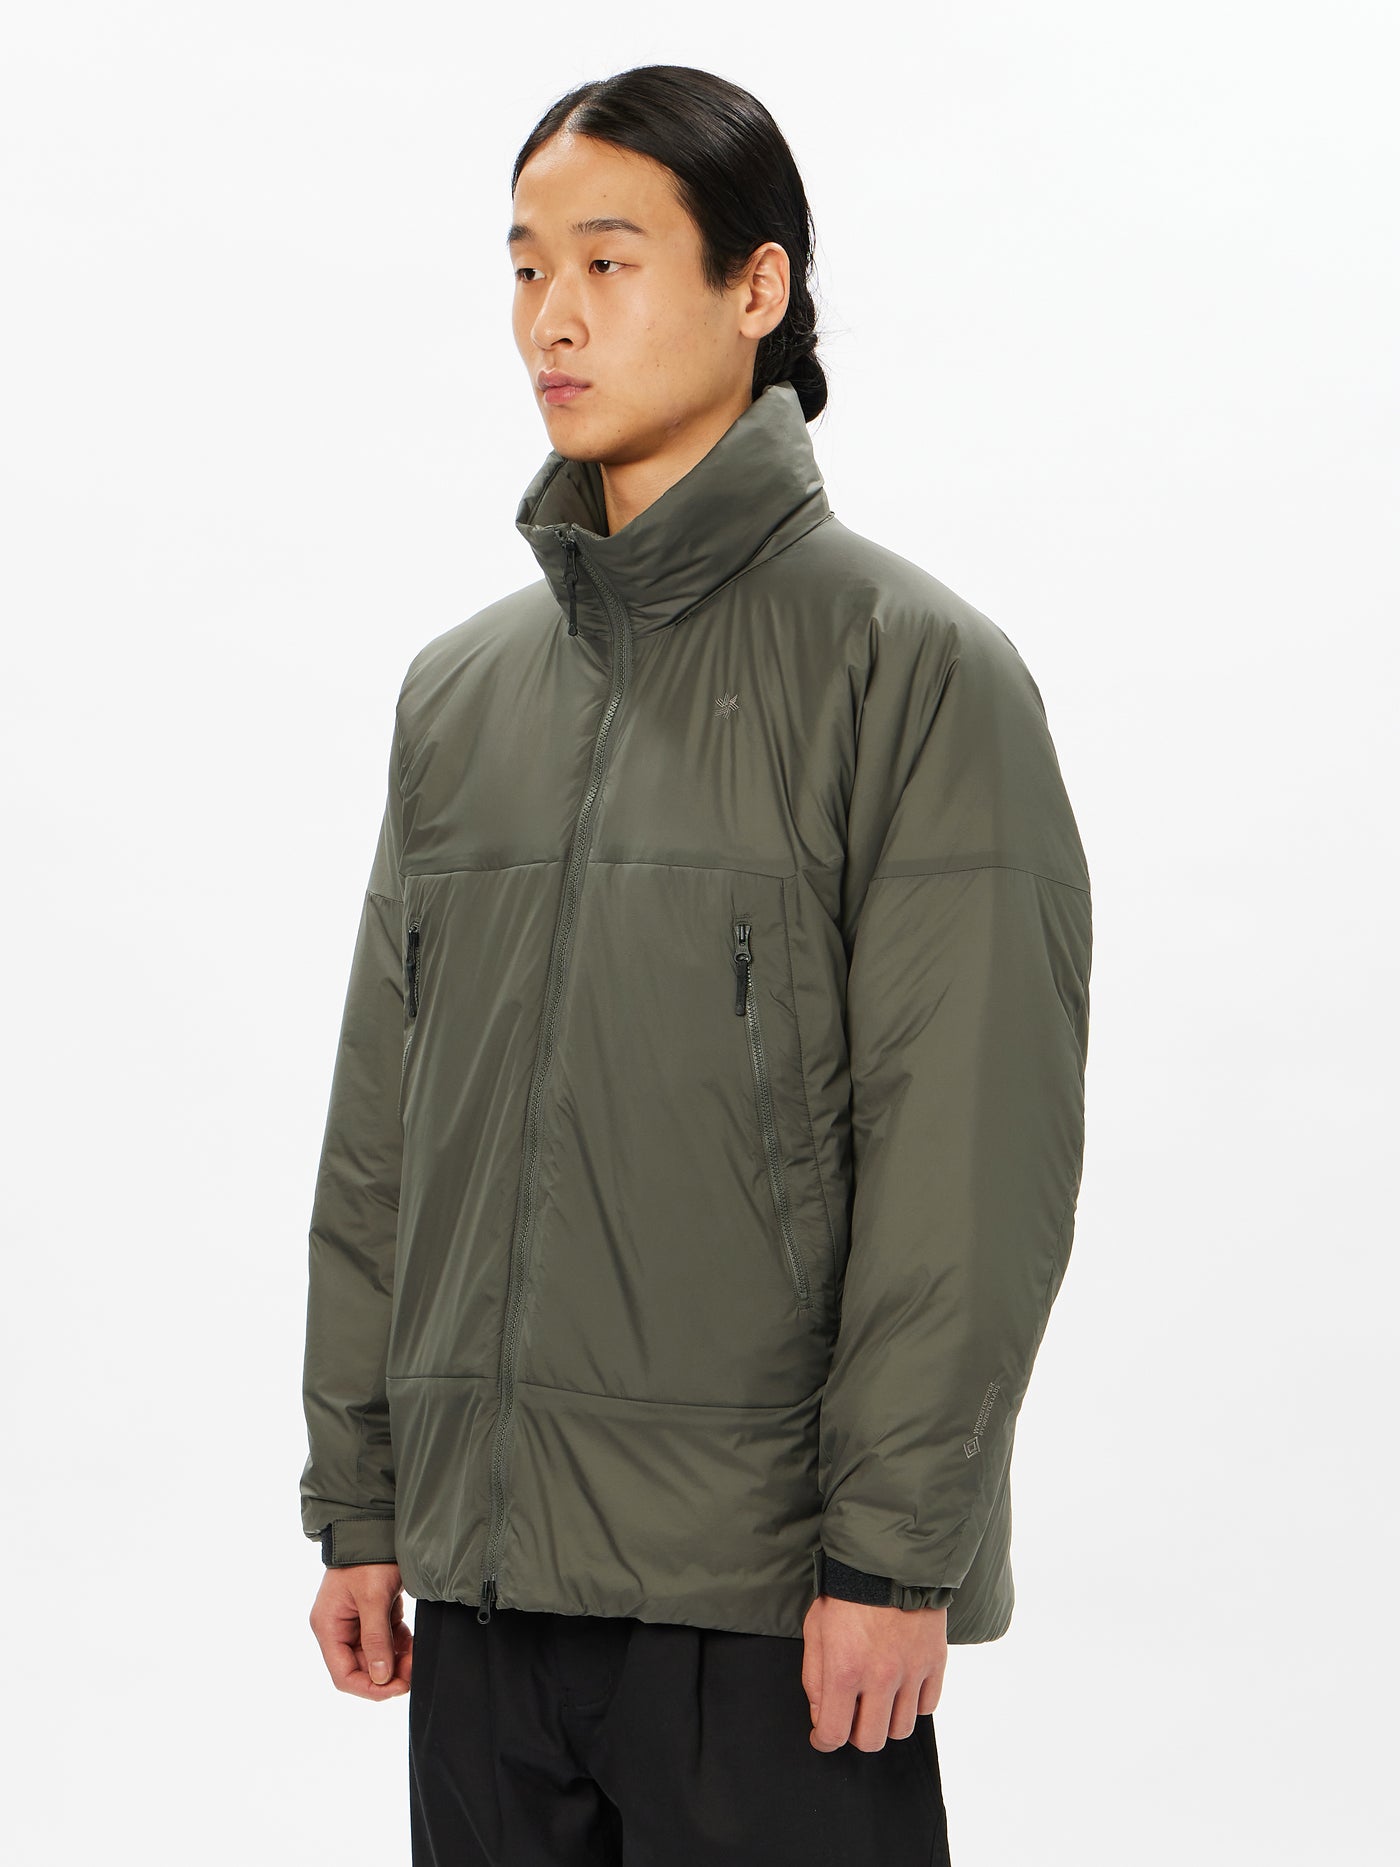 GORE-TEX WINDSTOPPER Puffy Tac Jacket